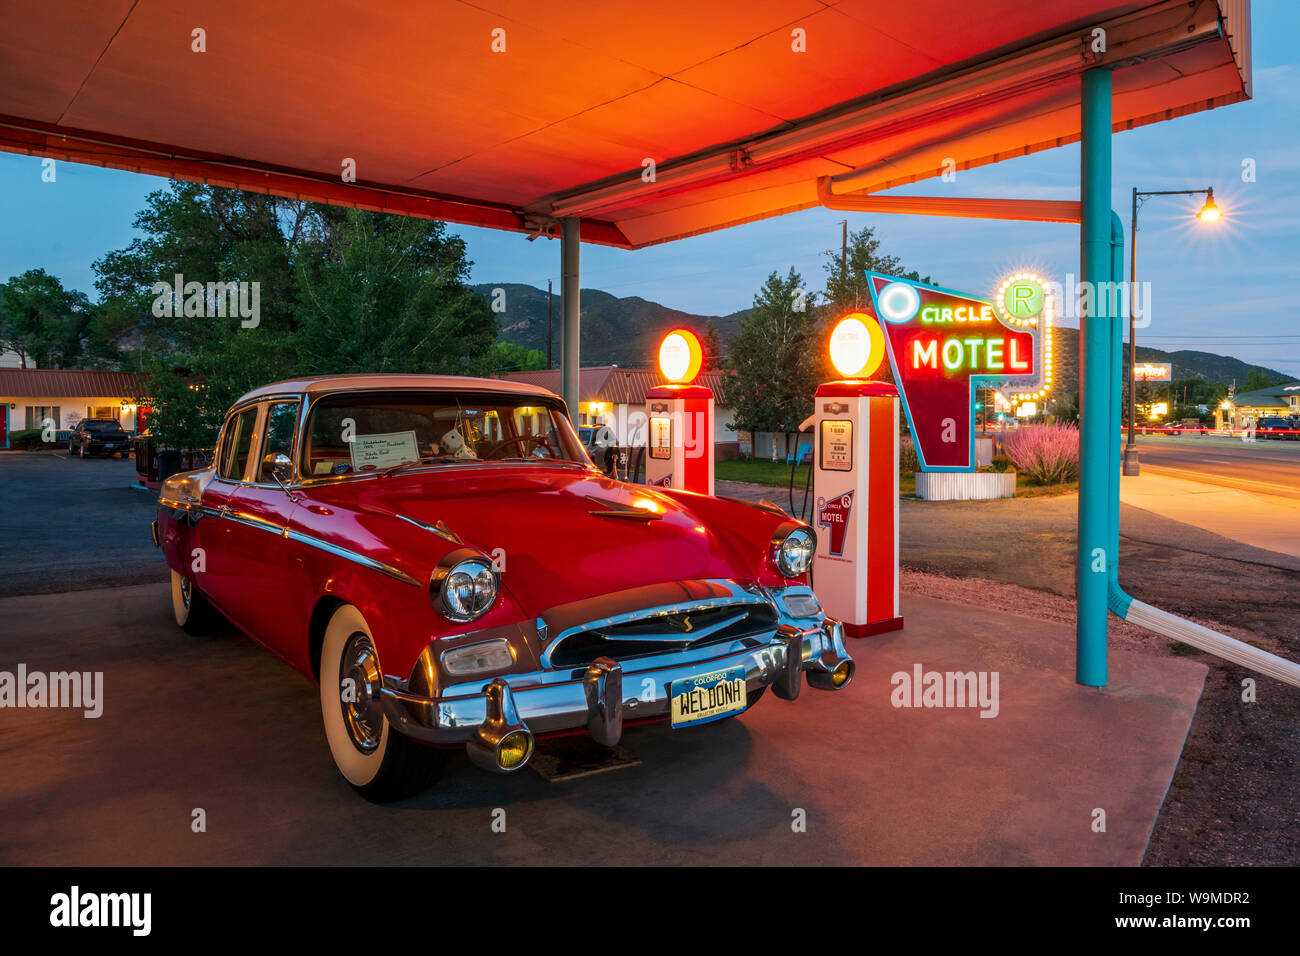 Dusk view of 1955 Studebaker President classic car parked in front of antique gas pumps converted to electric car chargers; The Circle R Motel; Salida Stock Photo